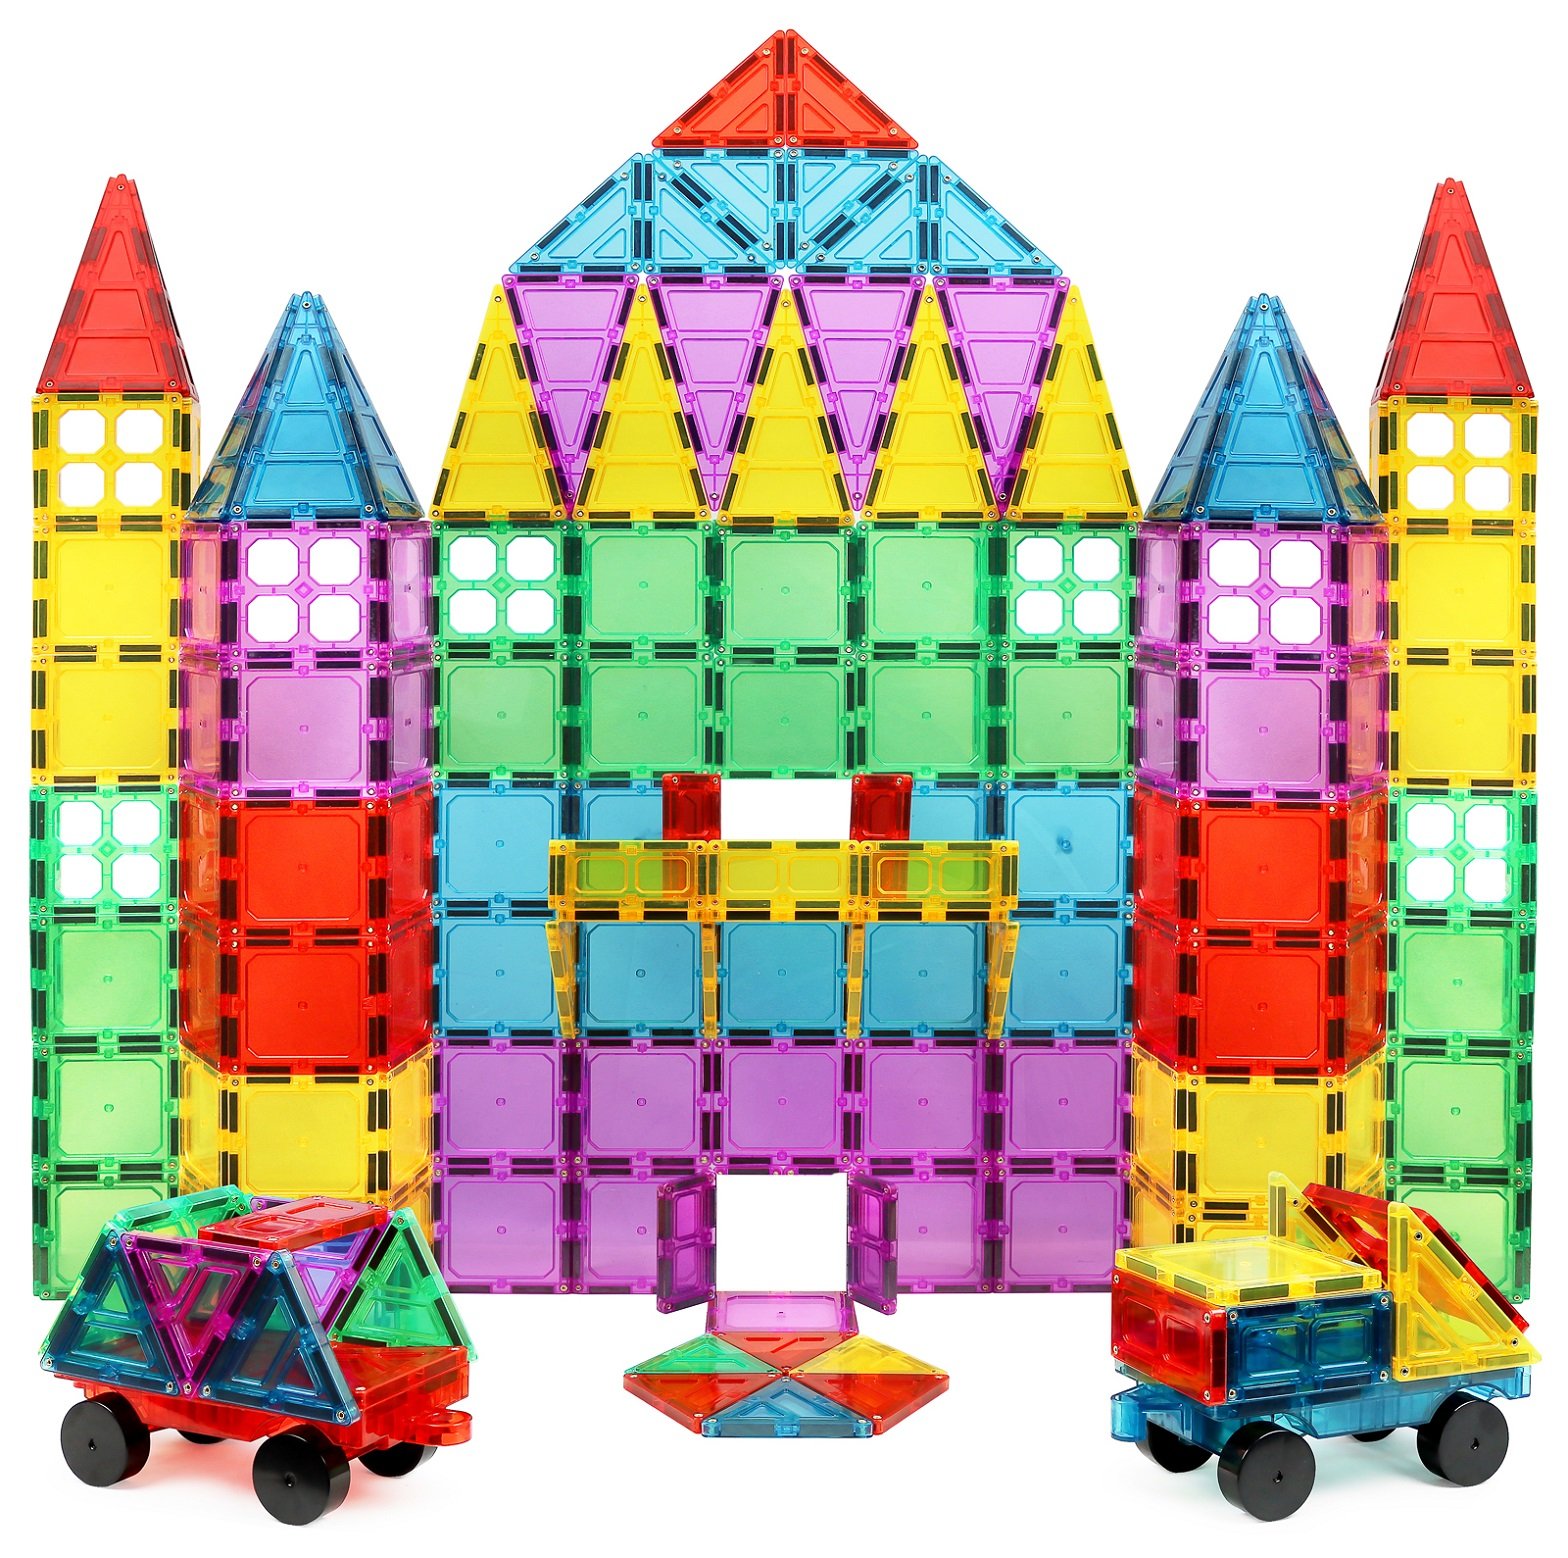 Magnet Build 100-Piece Extra Strong Magnetic Tiles Set - Magnets for Kids, 3D Tile Assorted Shapes & Colors, STEM Learning Toys for Ages 3+, Ideal Gift for Creative & Educational Play, Building Blocks